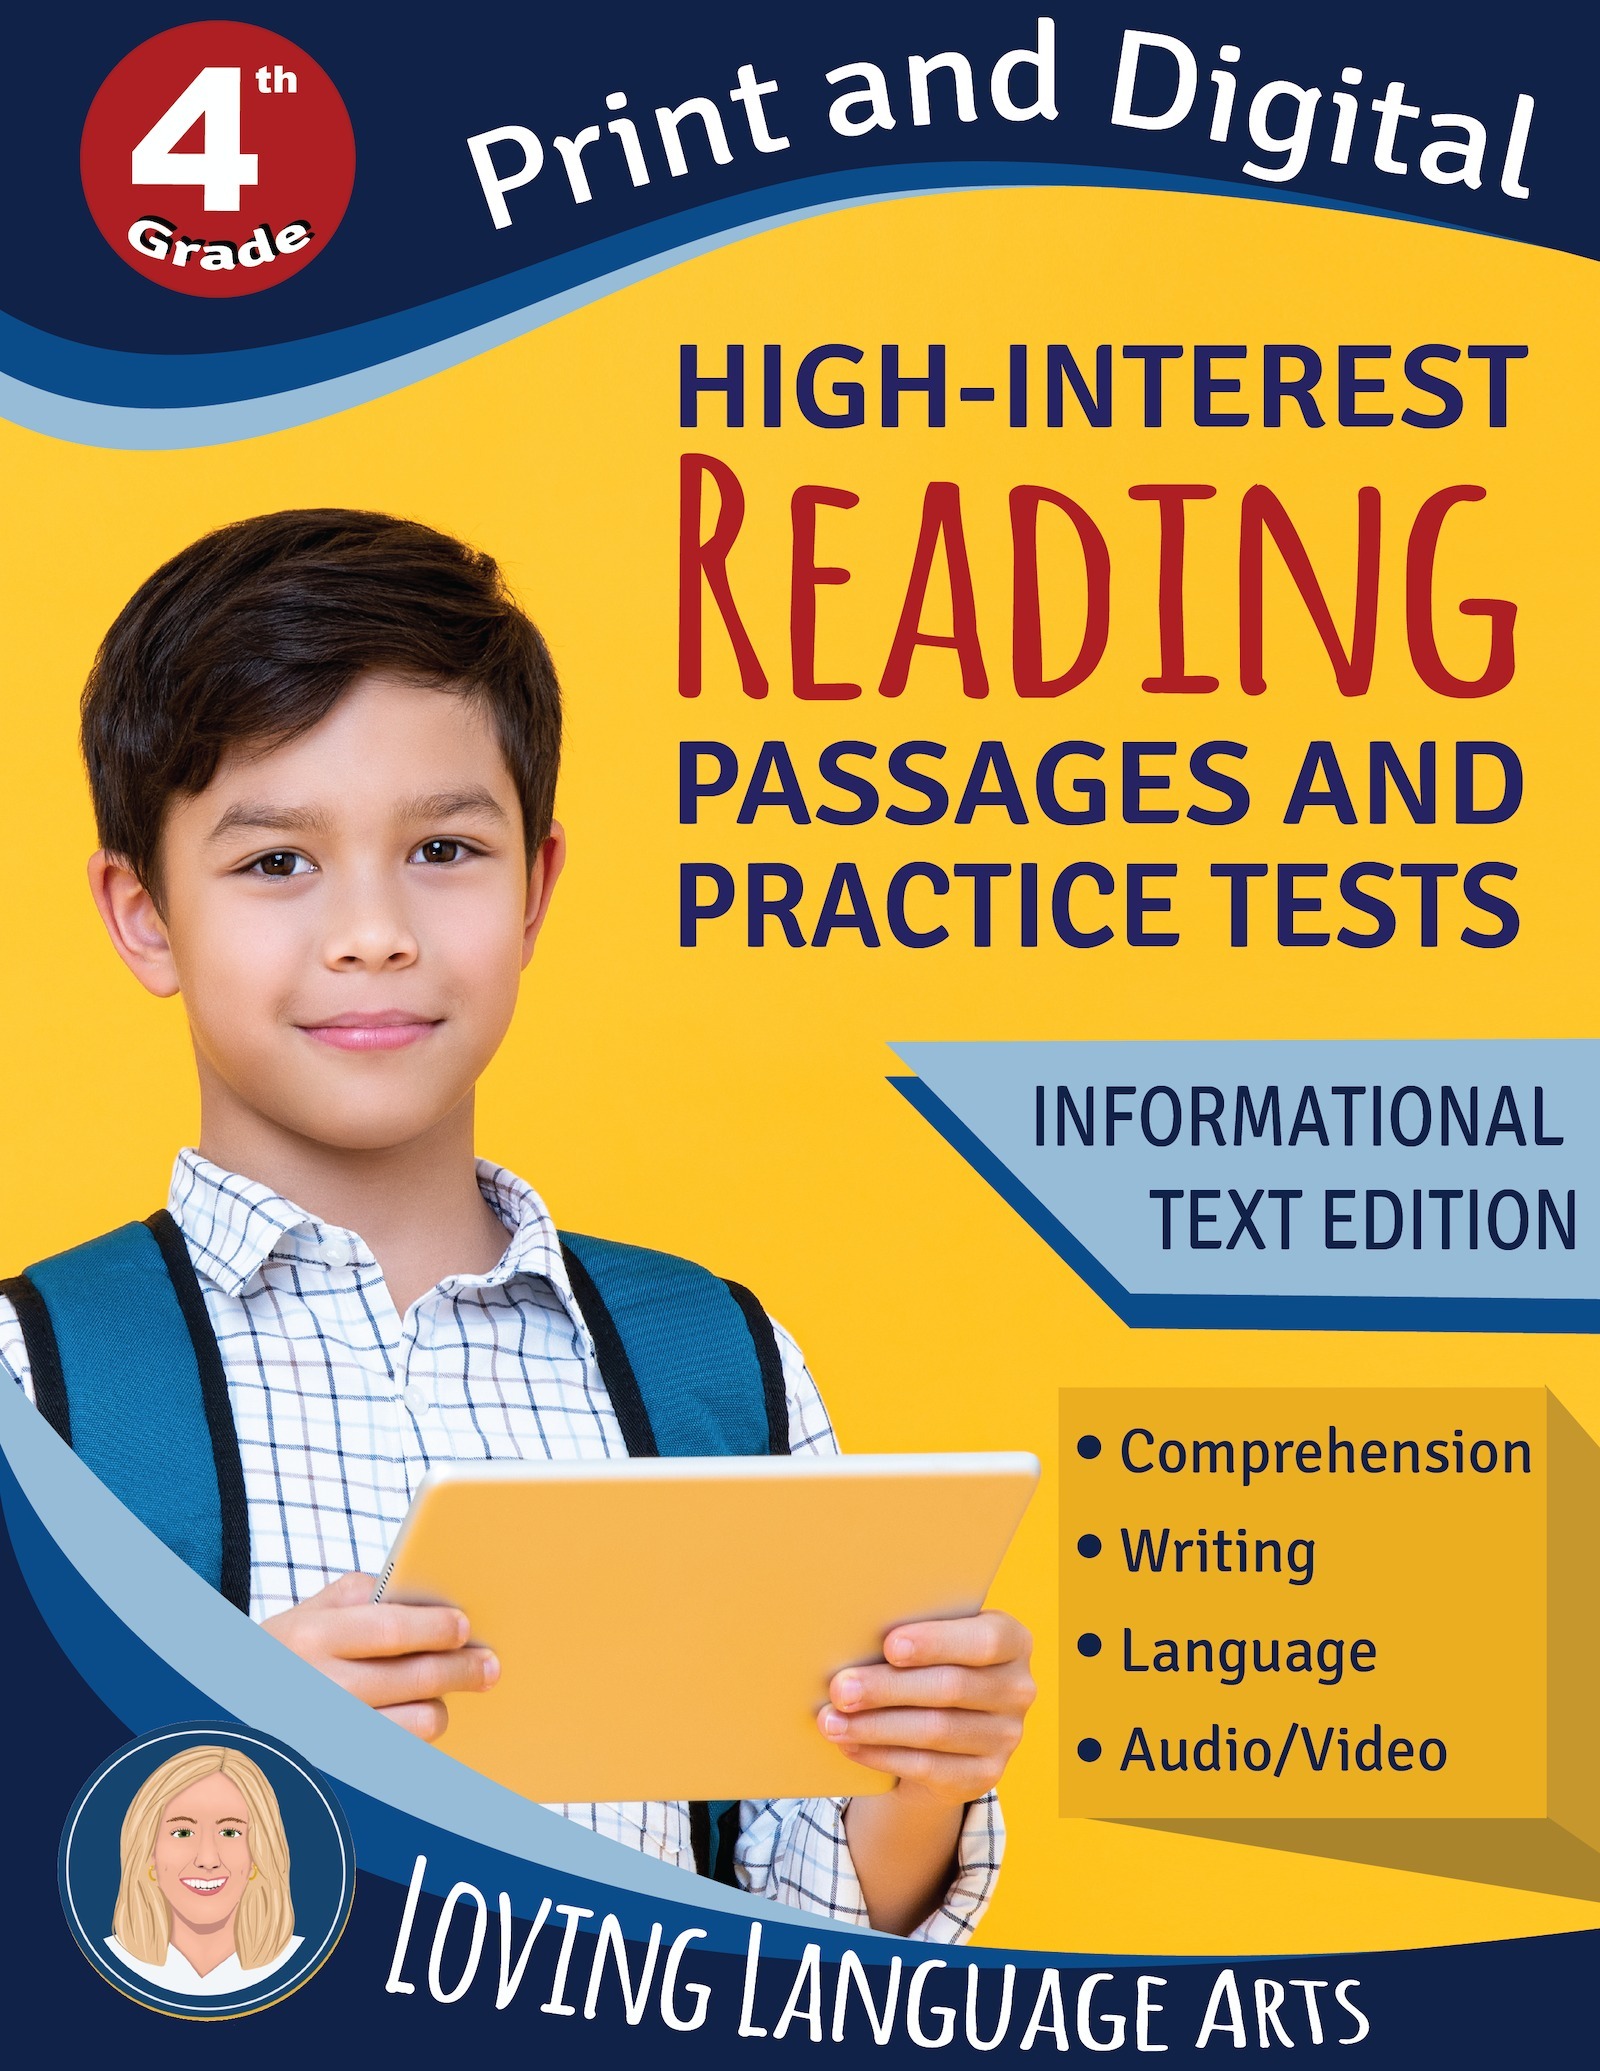 4th grade language arts workbook - High-interest passages and practice tests.